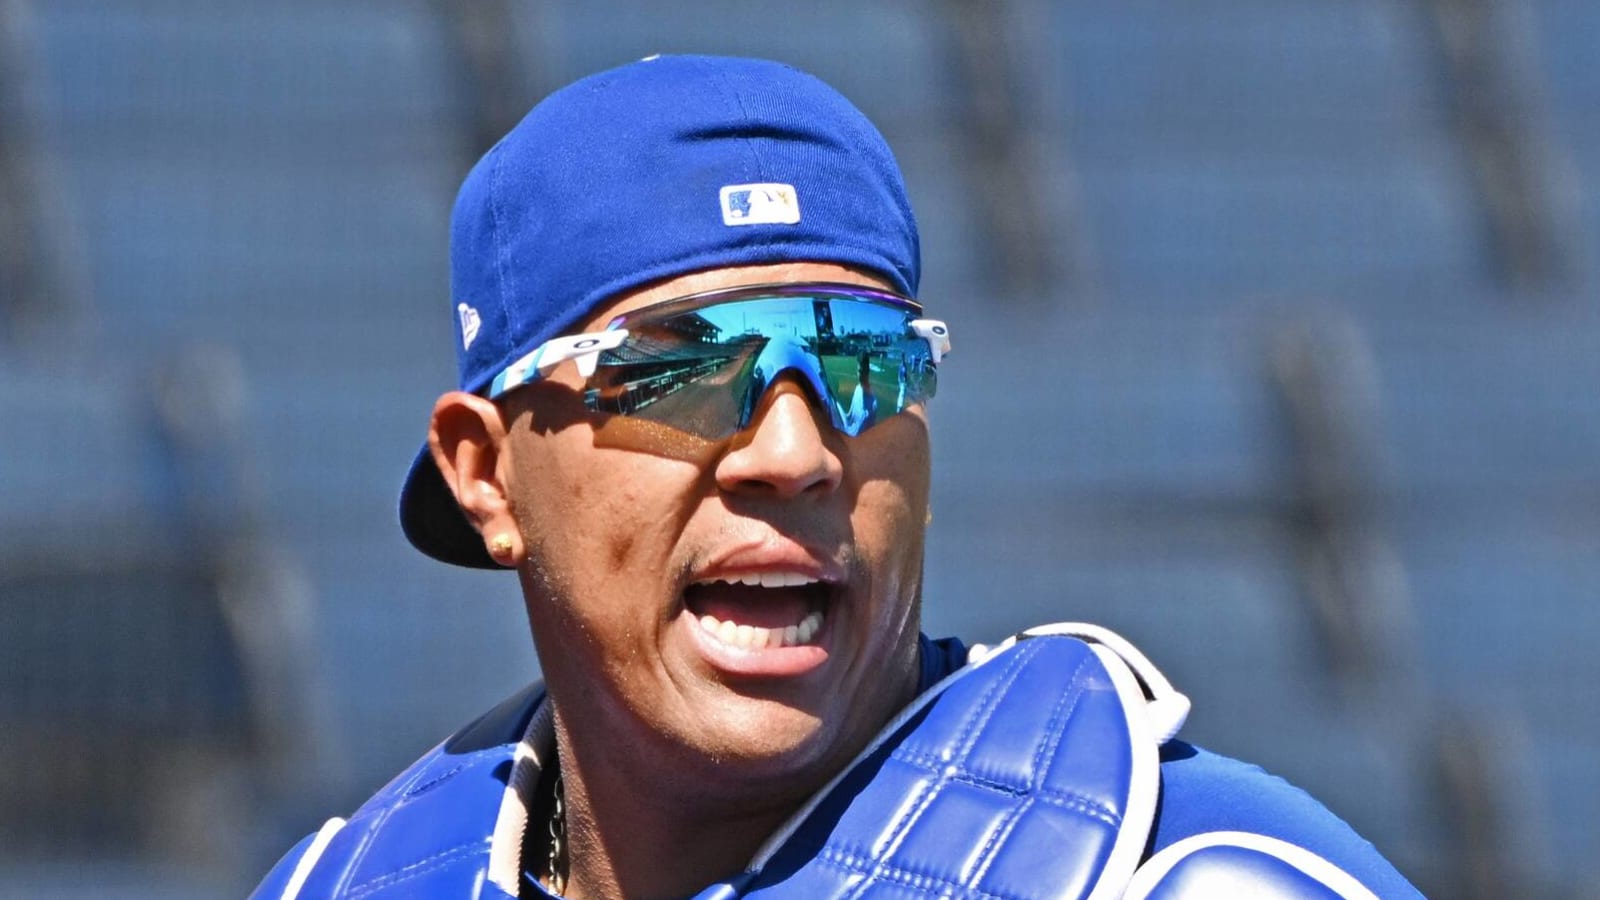 Royals release video showing Salvador Perez's rehab work